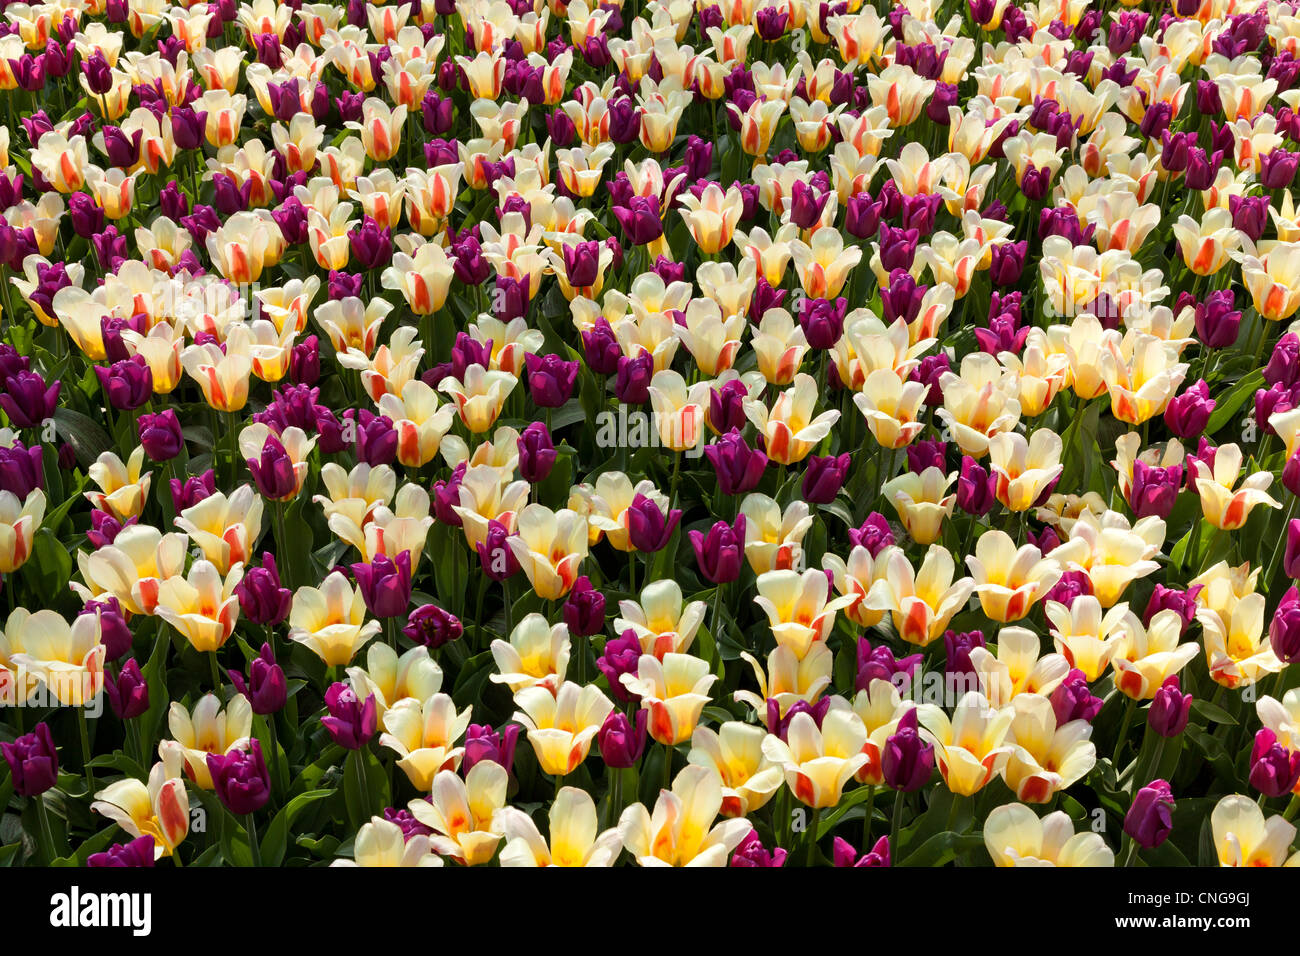 Flowerbed with tulips triomph 'Passionale' and kaufmaniana 'Glück'. Stock Photo